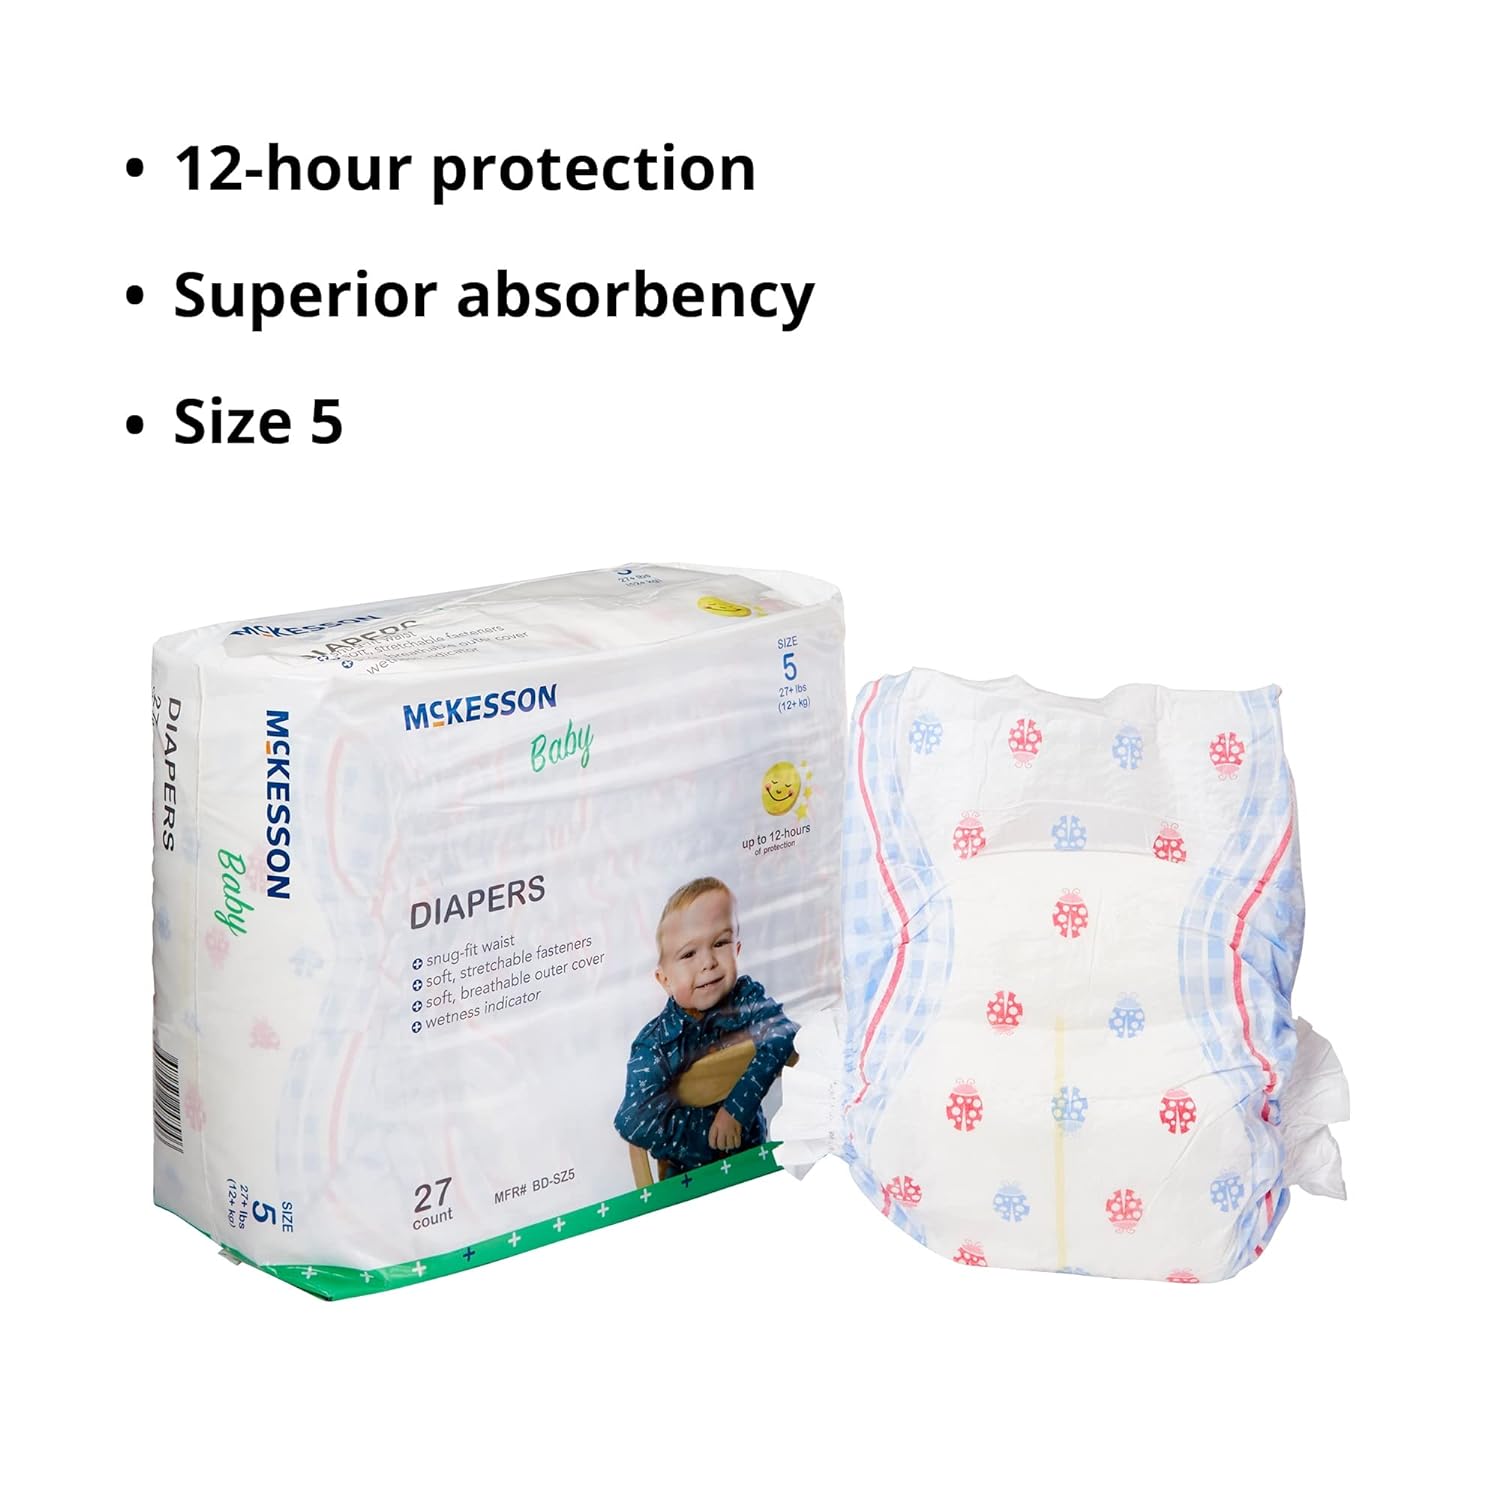 McKesson Baby Diapers, Size 5 (Over 27 lbs), 27 Count, 1 Pack